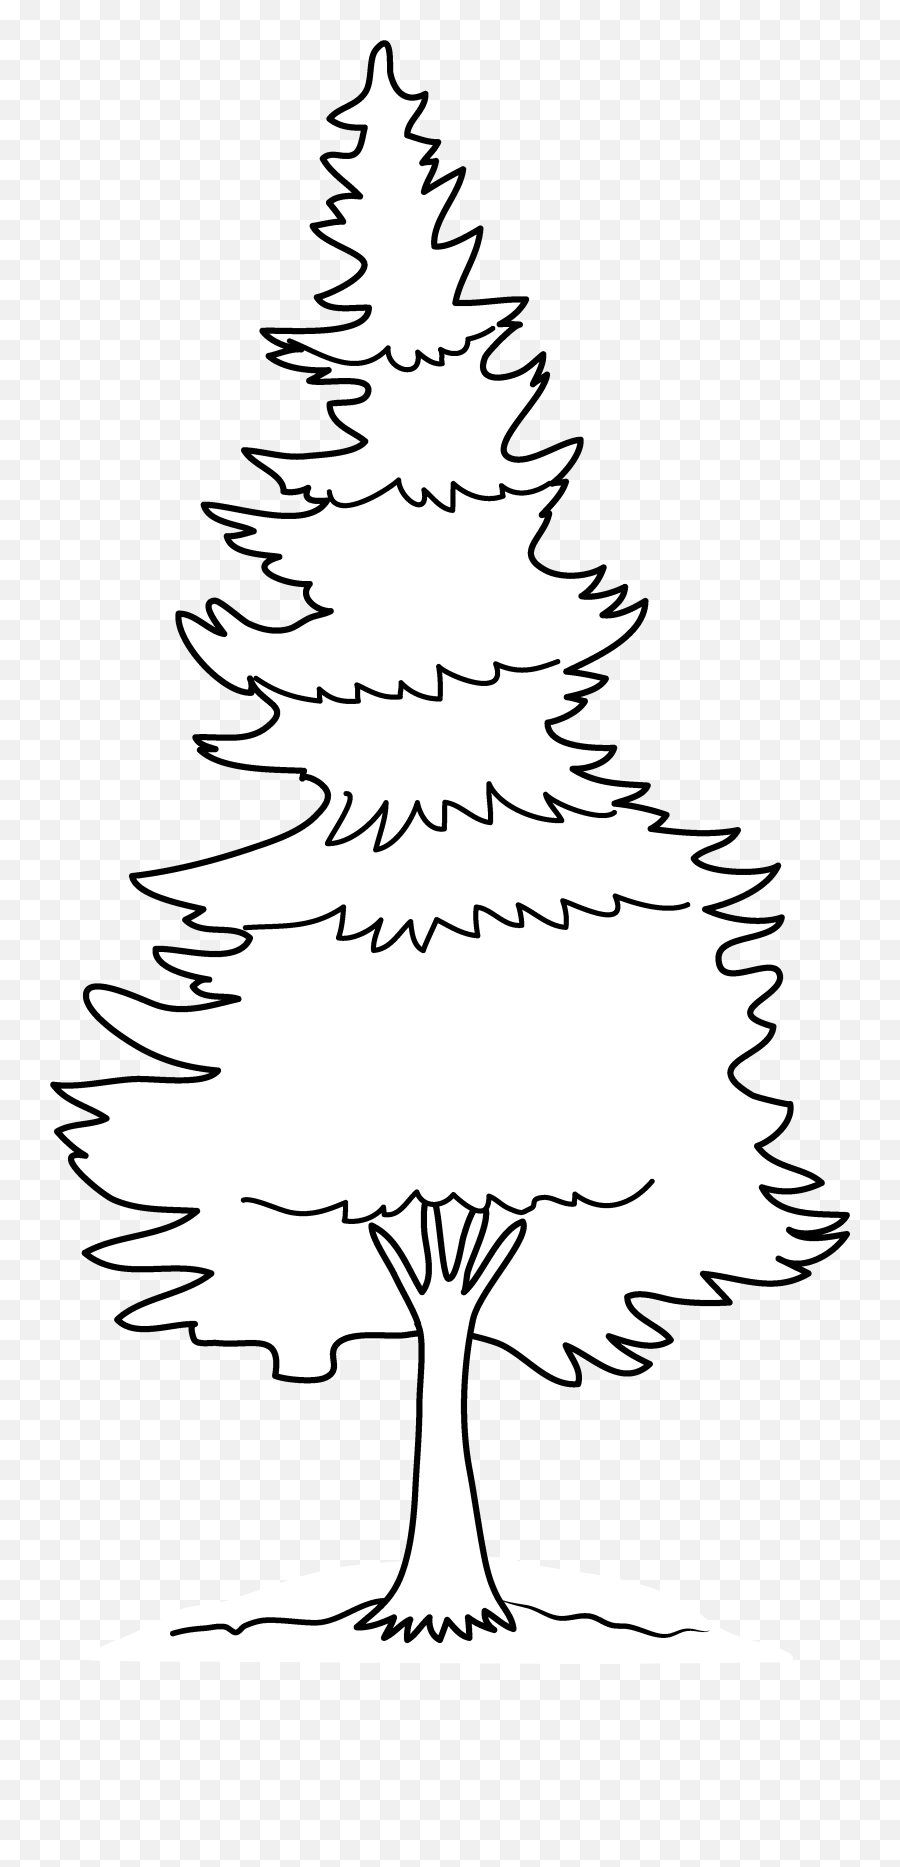 Pine Tree Coloring Page Free Clip Art - White Pine Trees With Black Background Emoji,Pine Tree Clipart